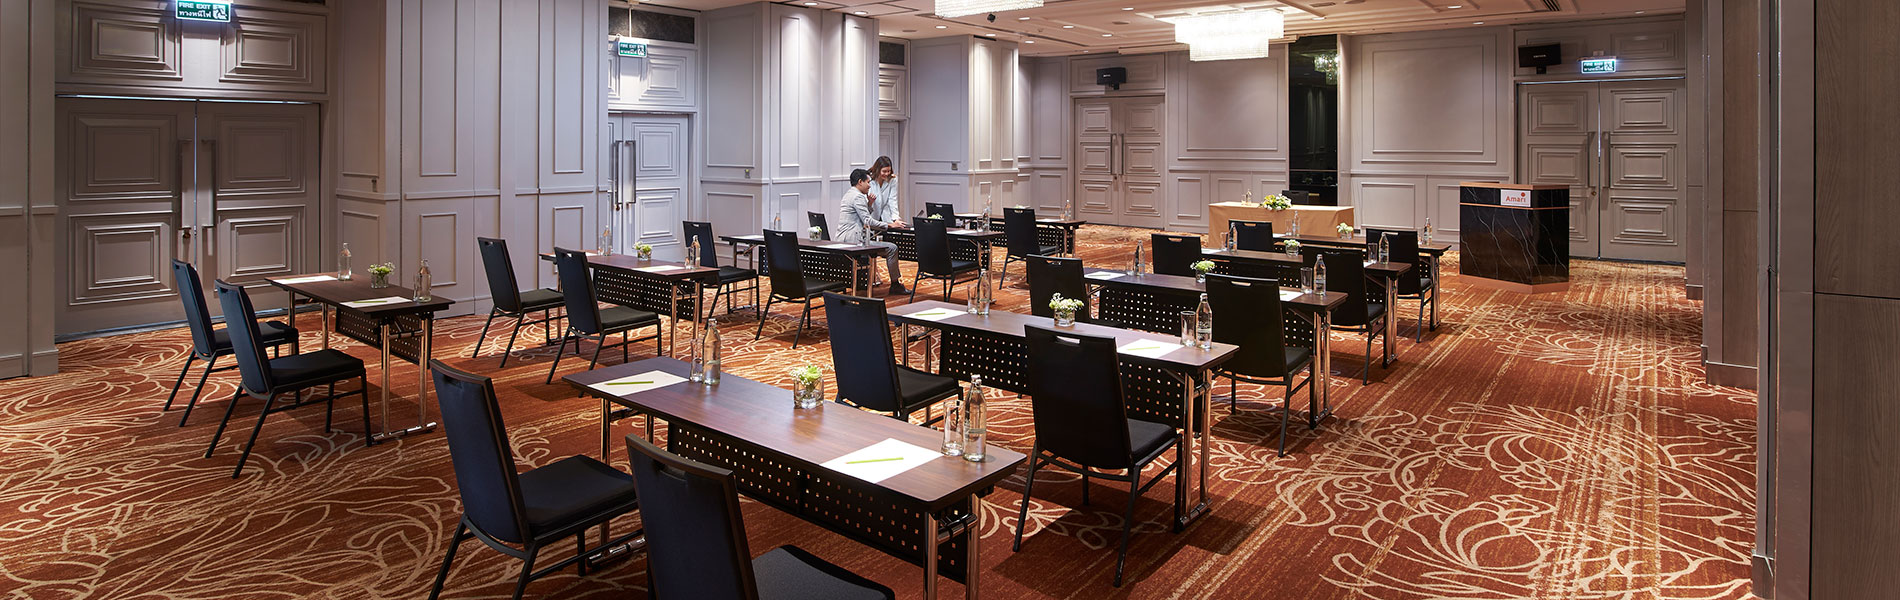 Function Rooms Facilities - فندق أماري دون موانج إيربورت بانكوك